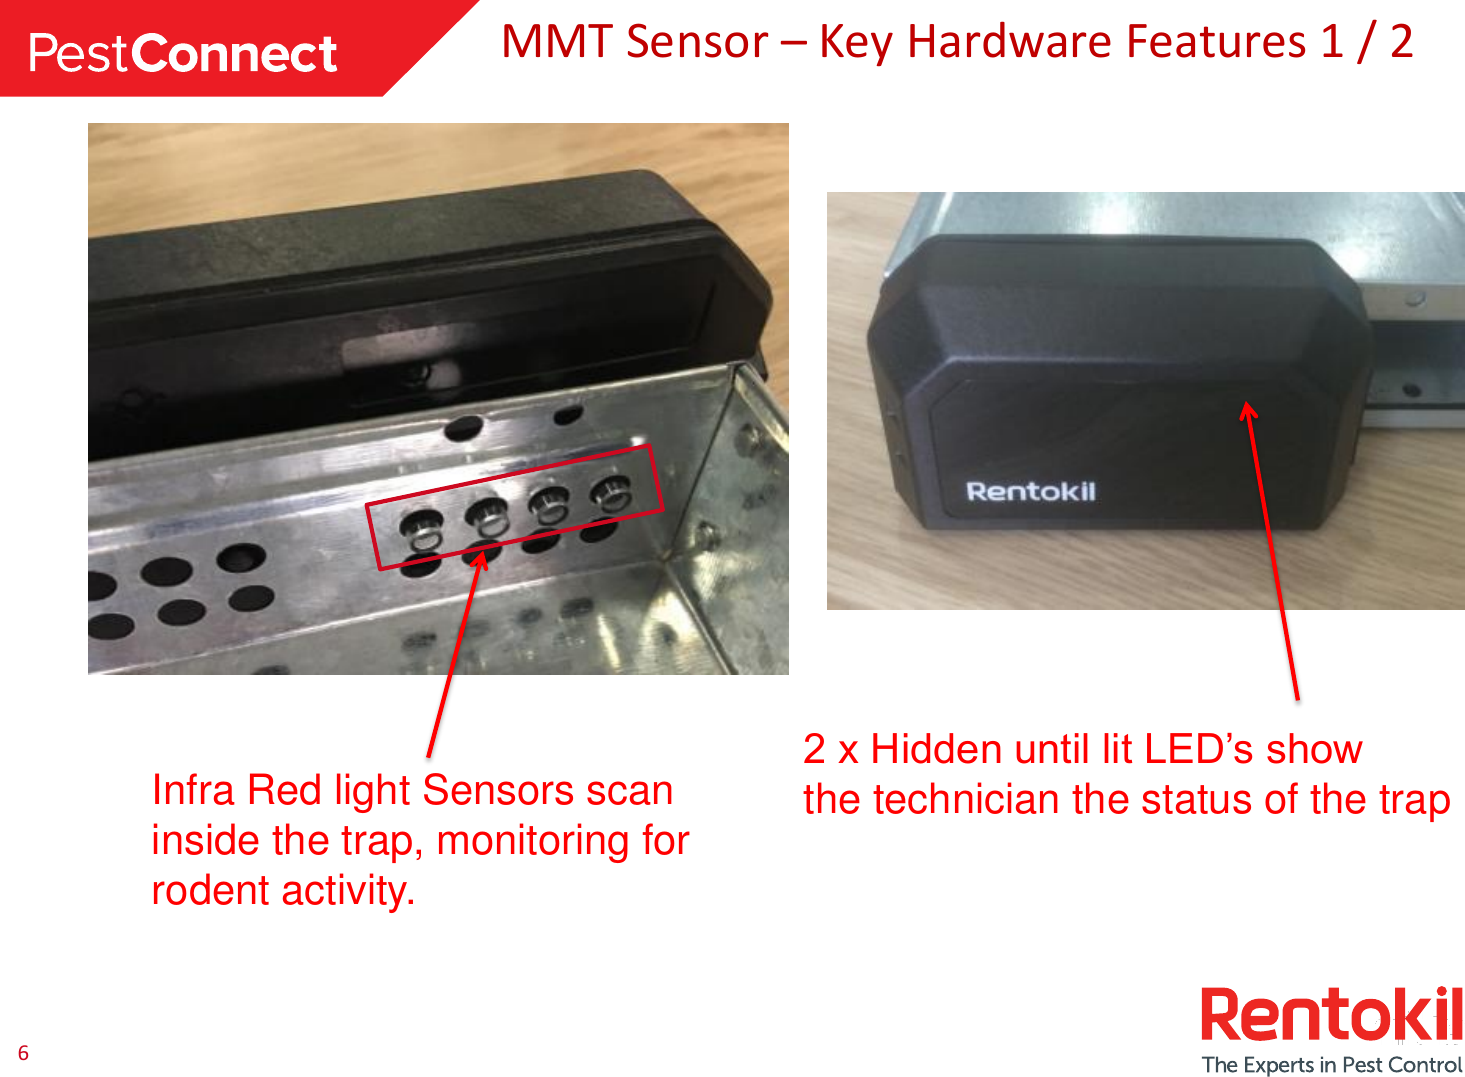 6MMT Sensor –Key Hardware Features 1 / 2Infra Red light Sensors scan inside the trap, monitoring for rodent activity.2 x Hidden until lit LED’s show the technician the status of the trap